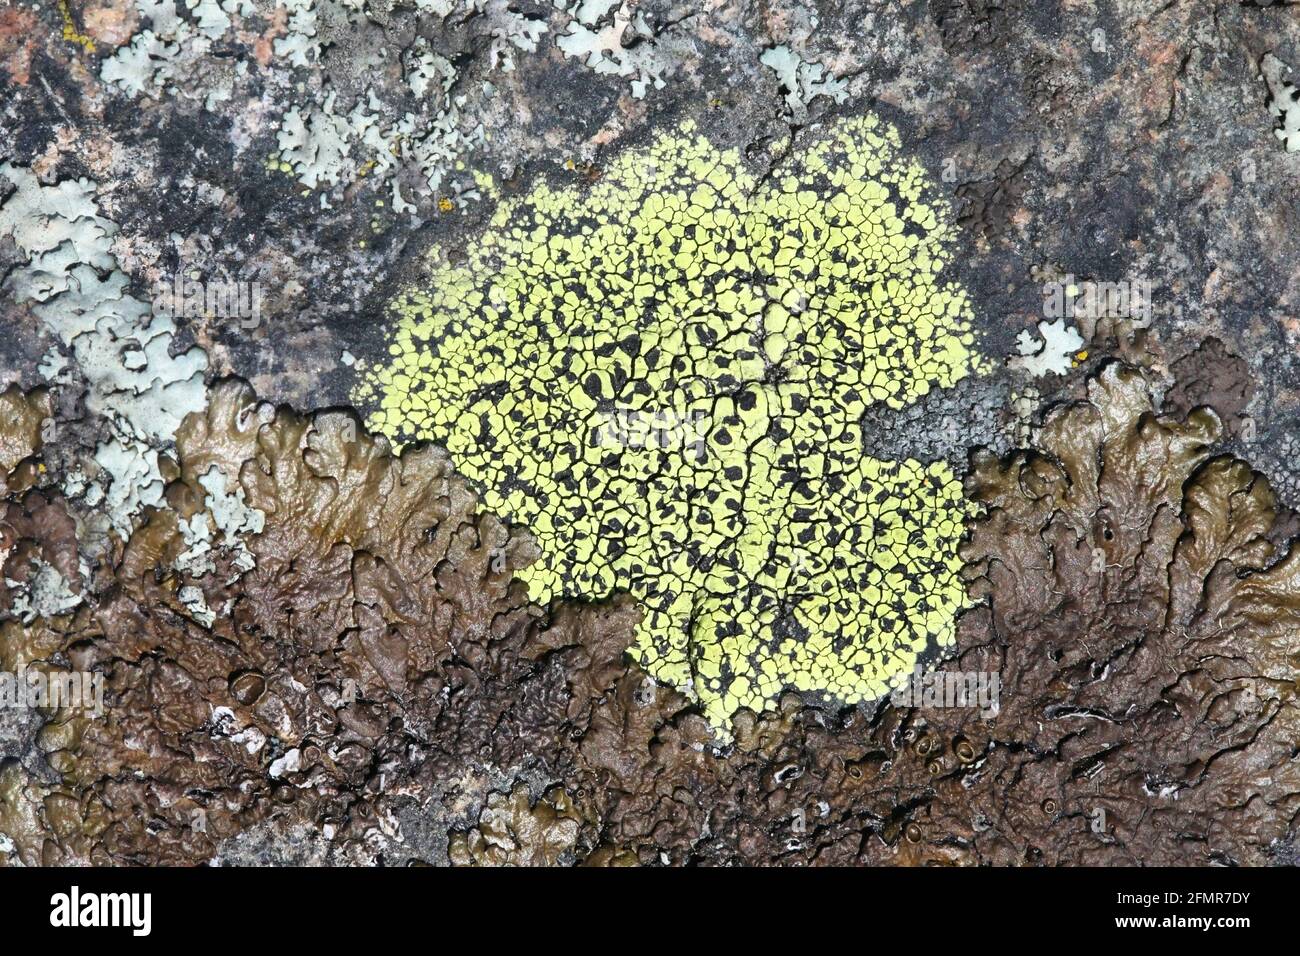 Rhizocarpon geographicum,  known as map lichen.  Map lichens are considered the oldest living organism on Earth, age-estimated at 8,600 years. Stock Photo